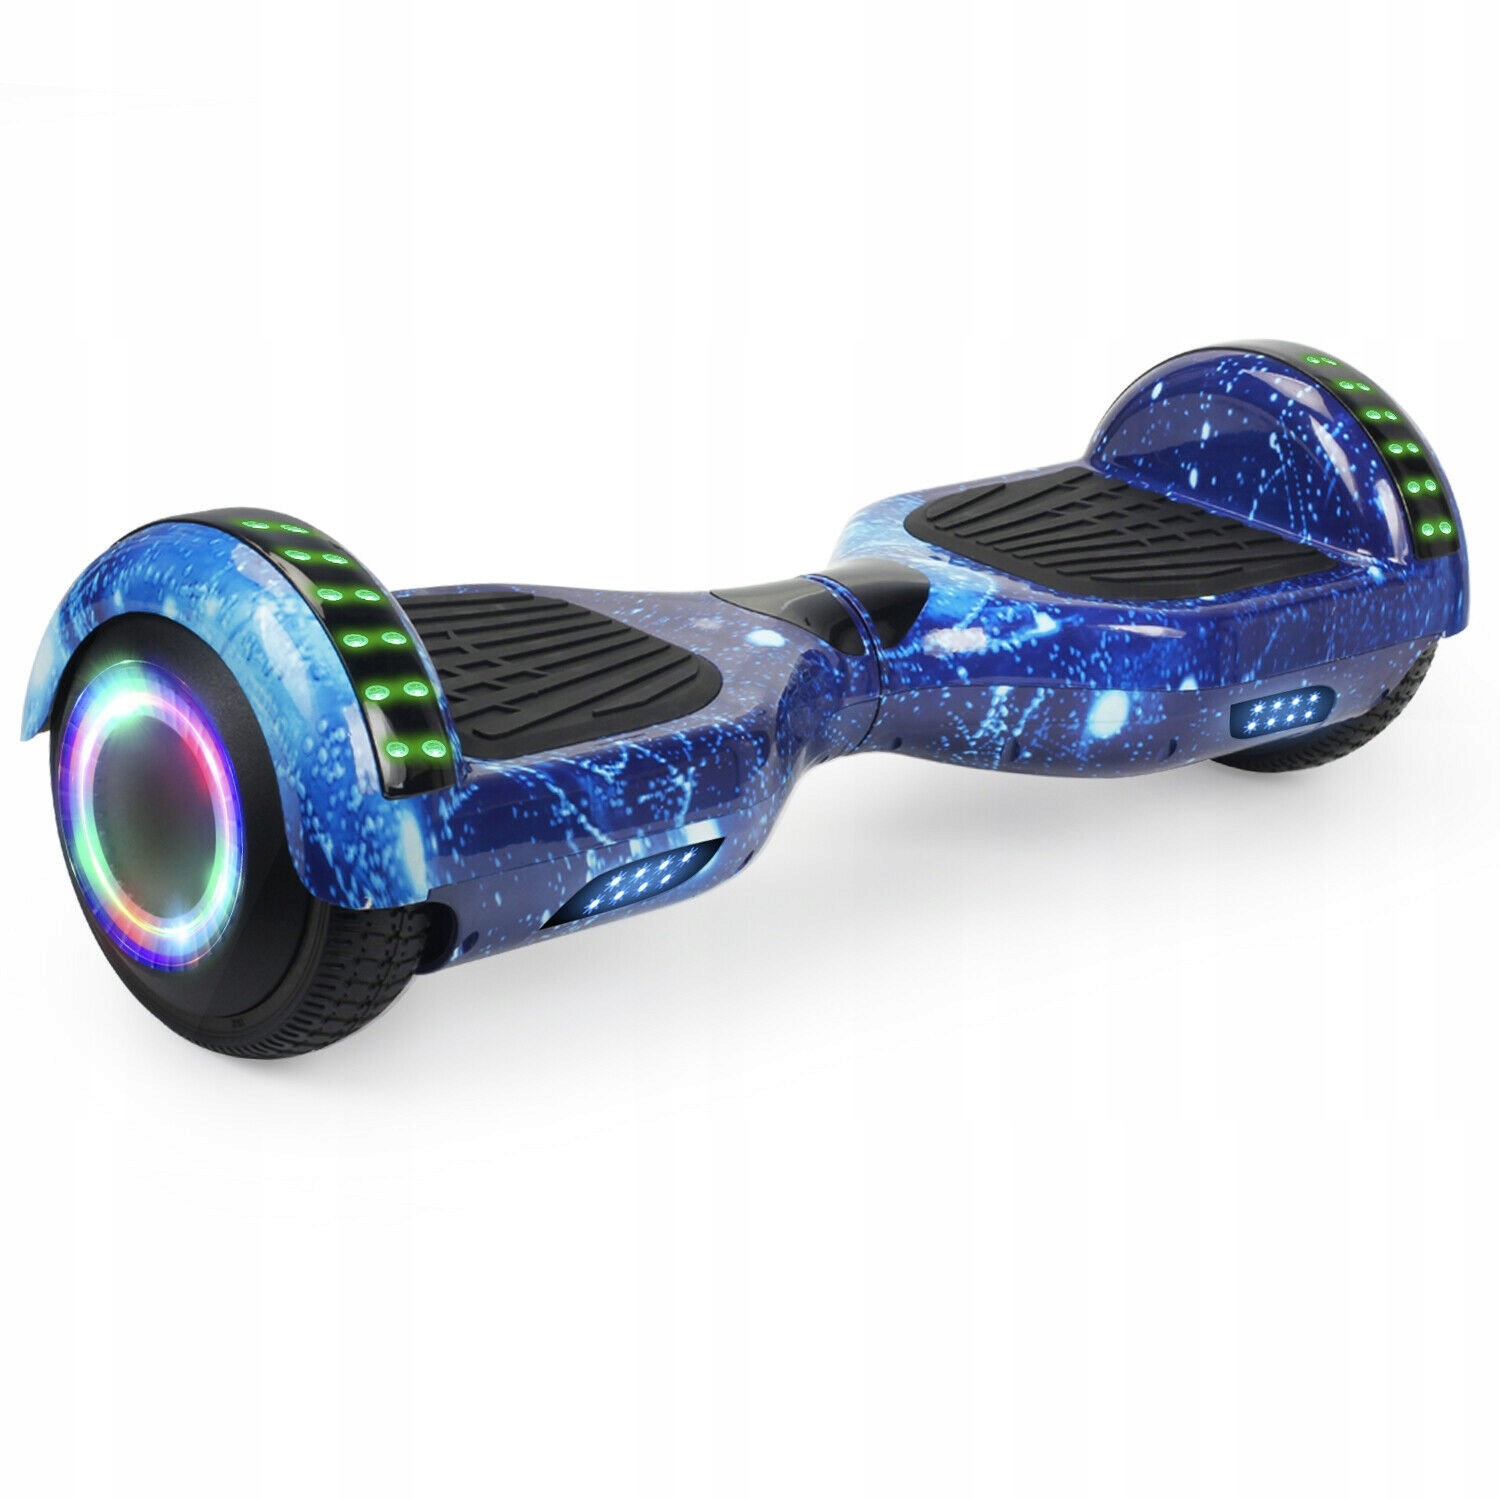 ELECTRIC HOVERBOARD 6.5 INCH BOARD Manufacturer's code CHIC D01